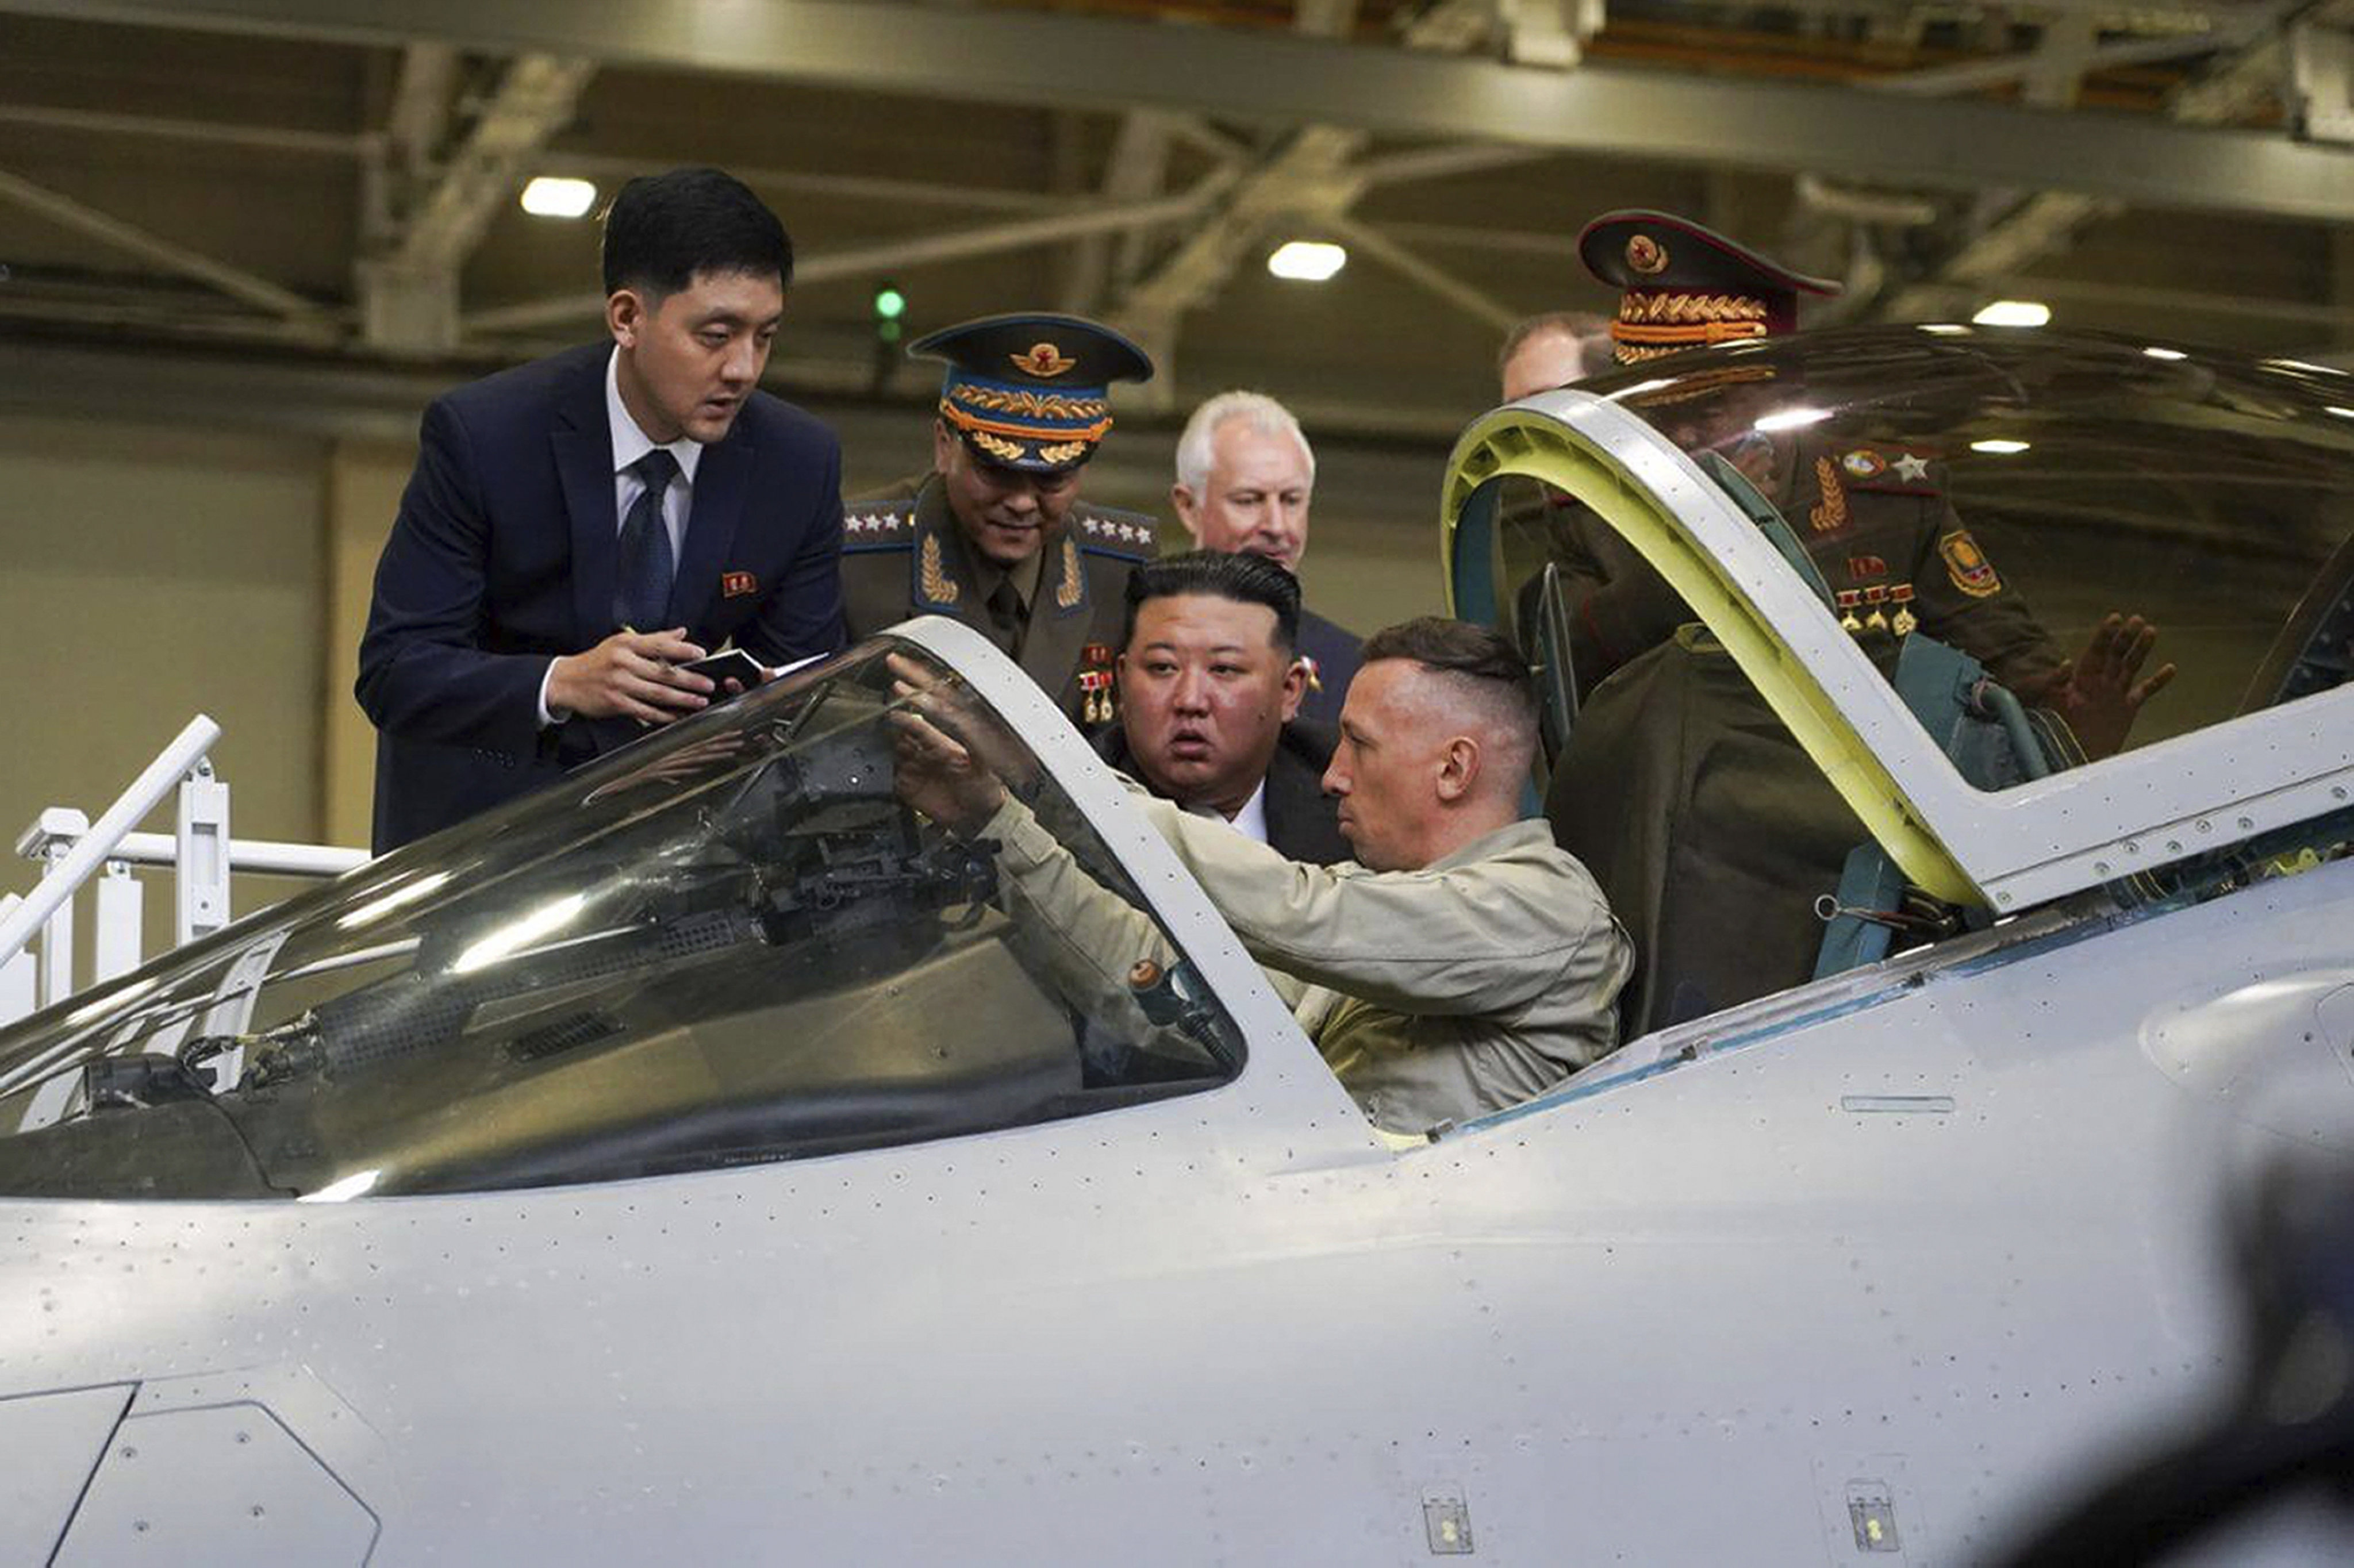 North Korean leader Kim Jong-un looks at a military jet cockpit while visiting a Russian aircraft plant in Komsomolsk-on-Amur, about 6,200km east of Moscow. Photo: AP